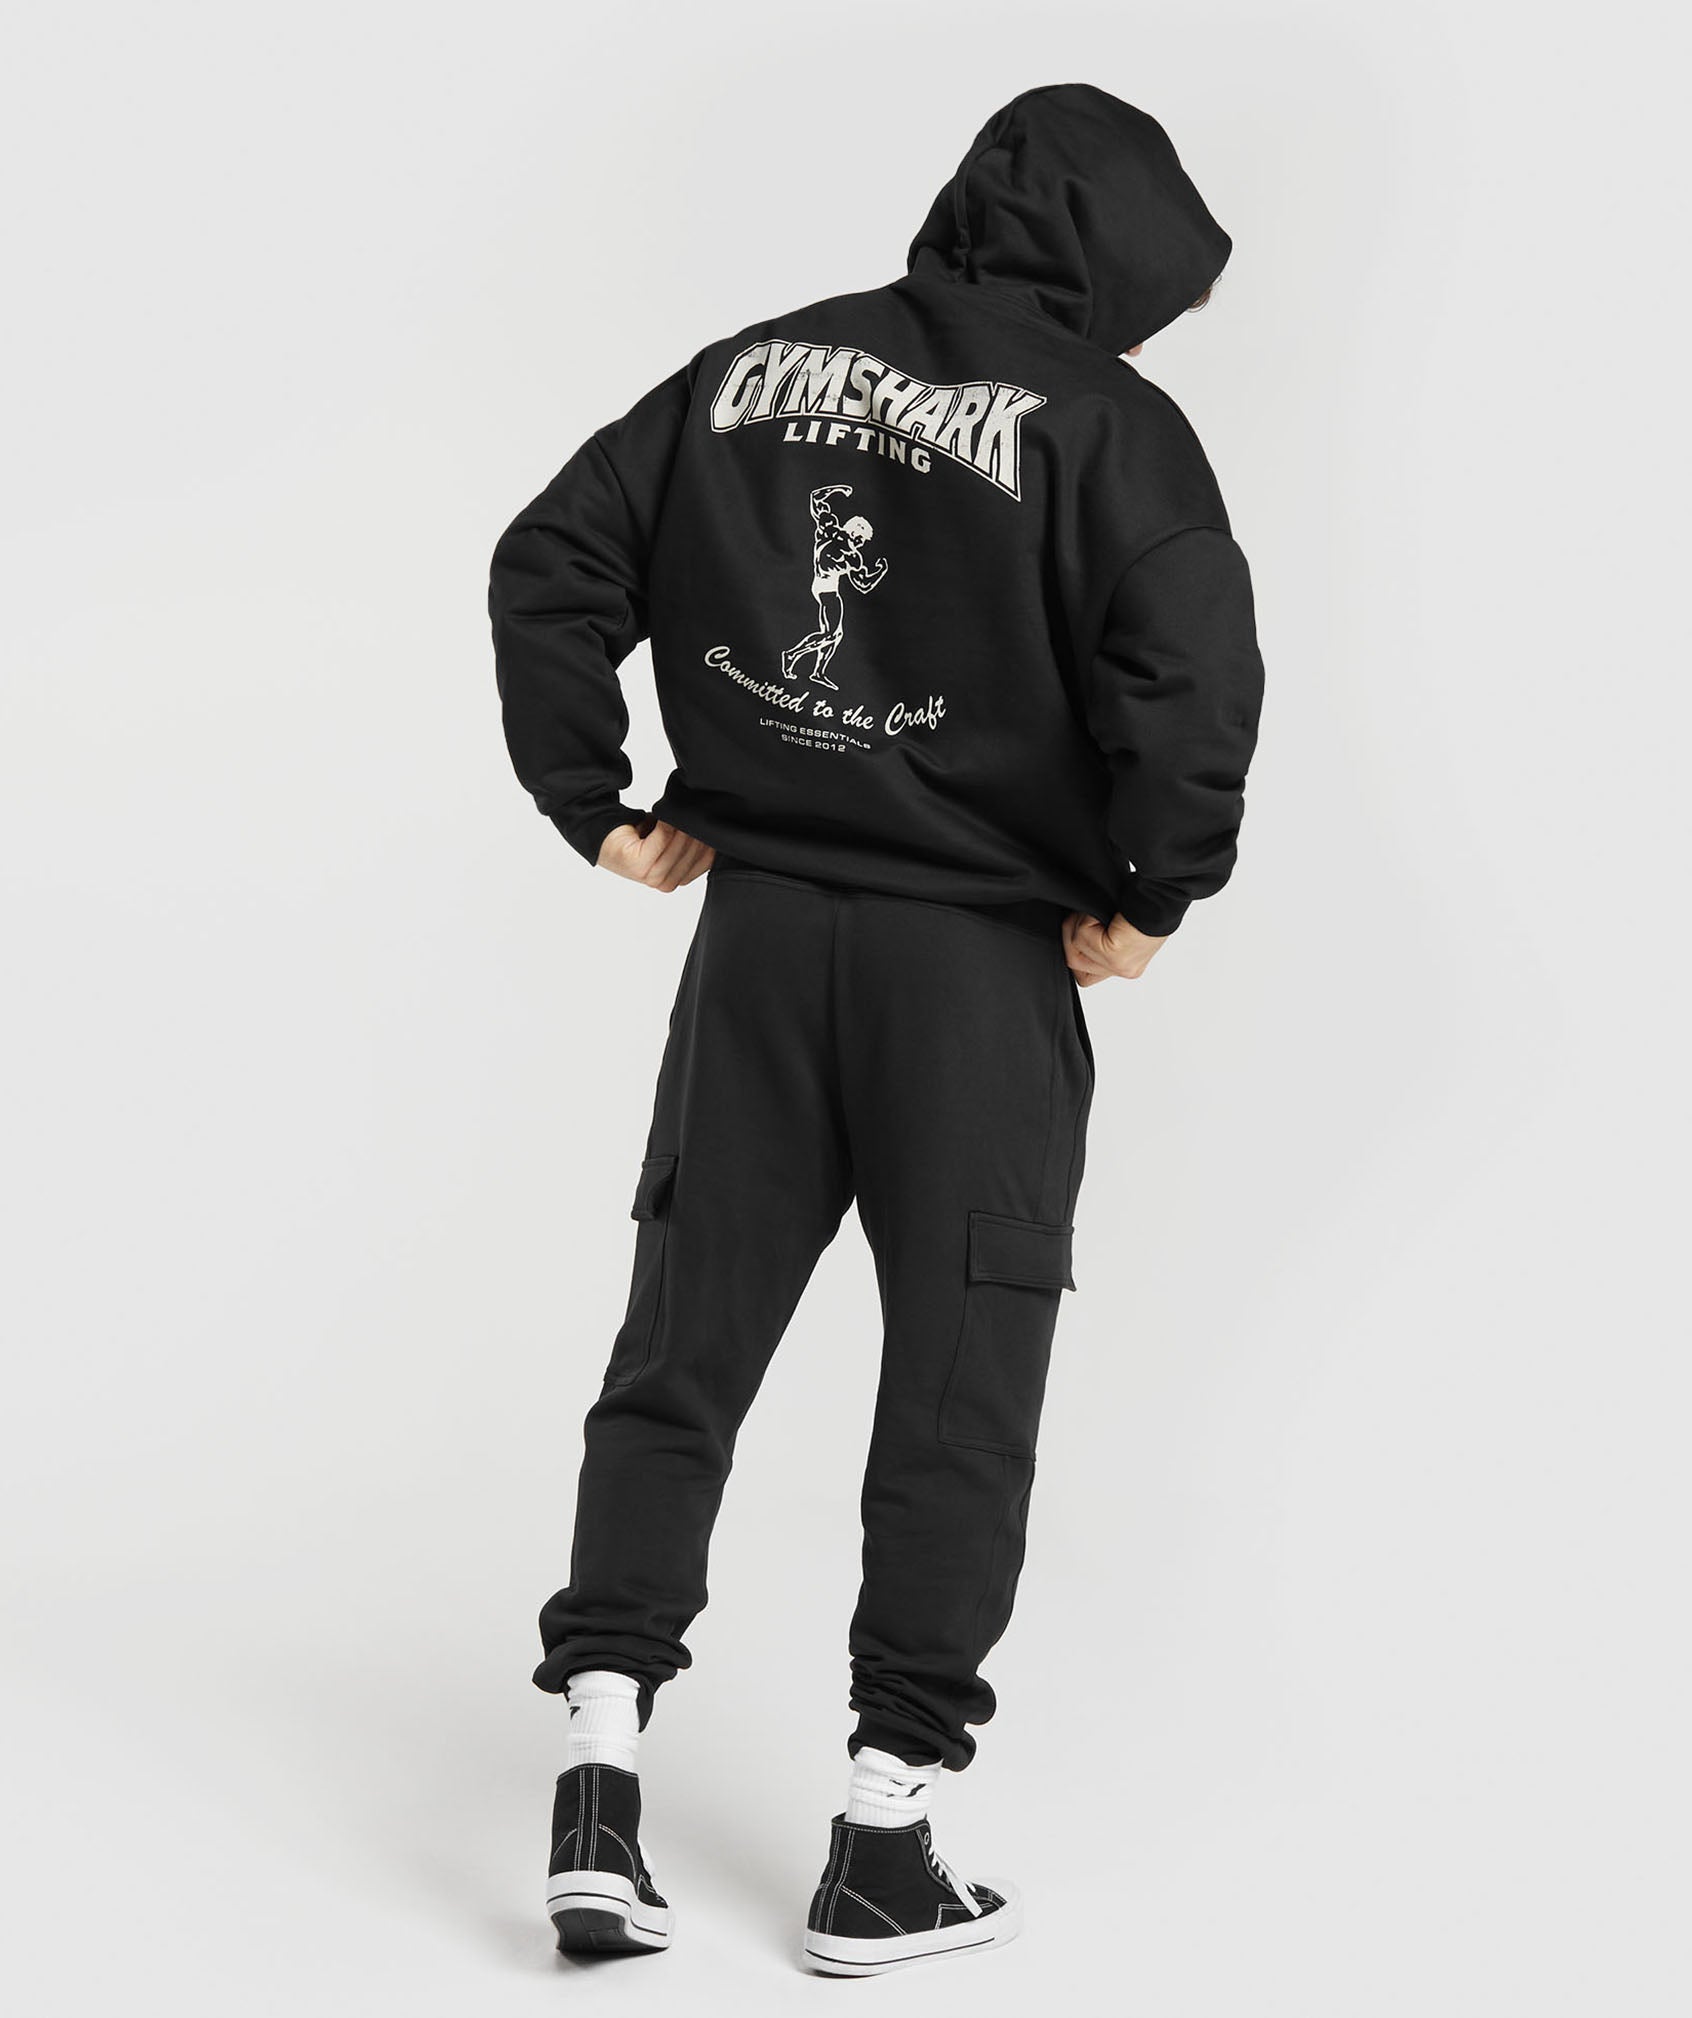 Committed to the Craft Hoodie in Black - view 4